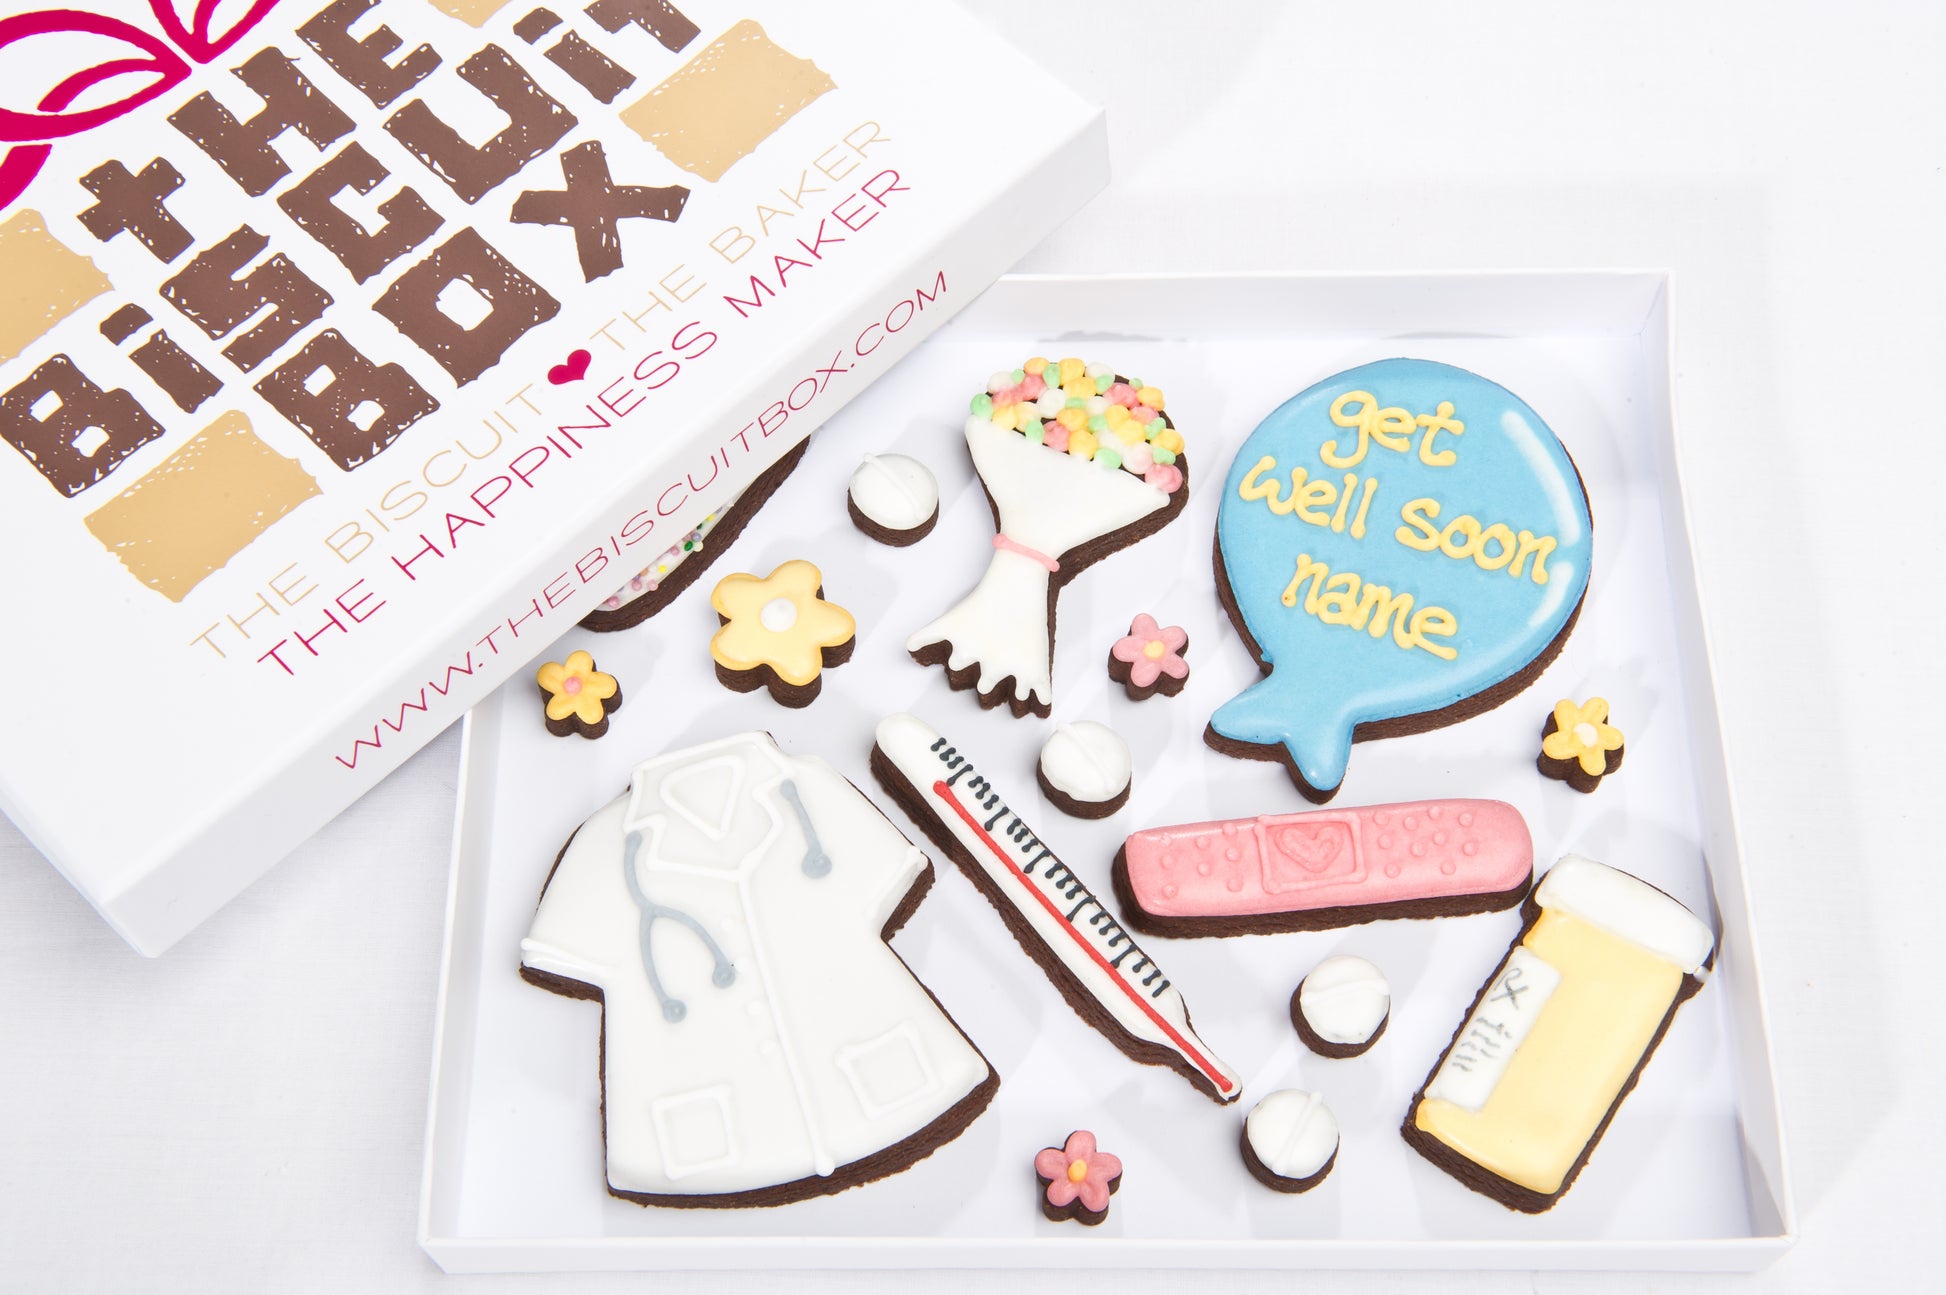 a shallow biscuit box with get well soon themed cookies. Balloon biscuit with get well soon plus a personalised name iced onto it. Plaster biscuit and mini flowers, doctors coat biscuit .